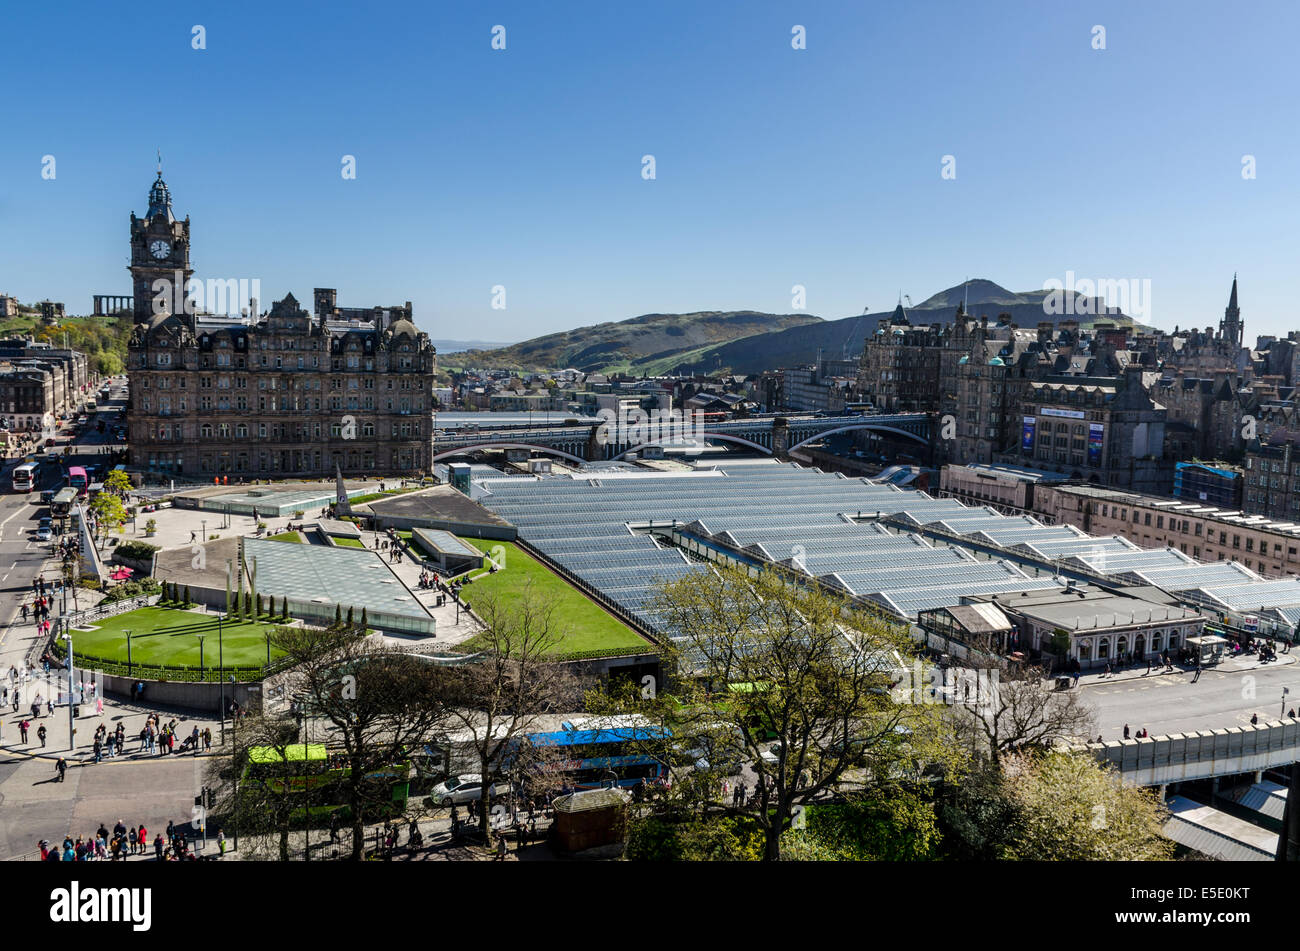 Looking East across Edinburgh to the Balmoral Hotel, Waverley Railway Station, North Bridge, Old Town and Arthur's Seat. Stock Photo